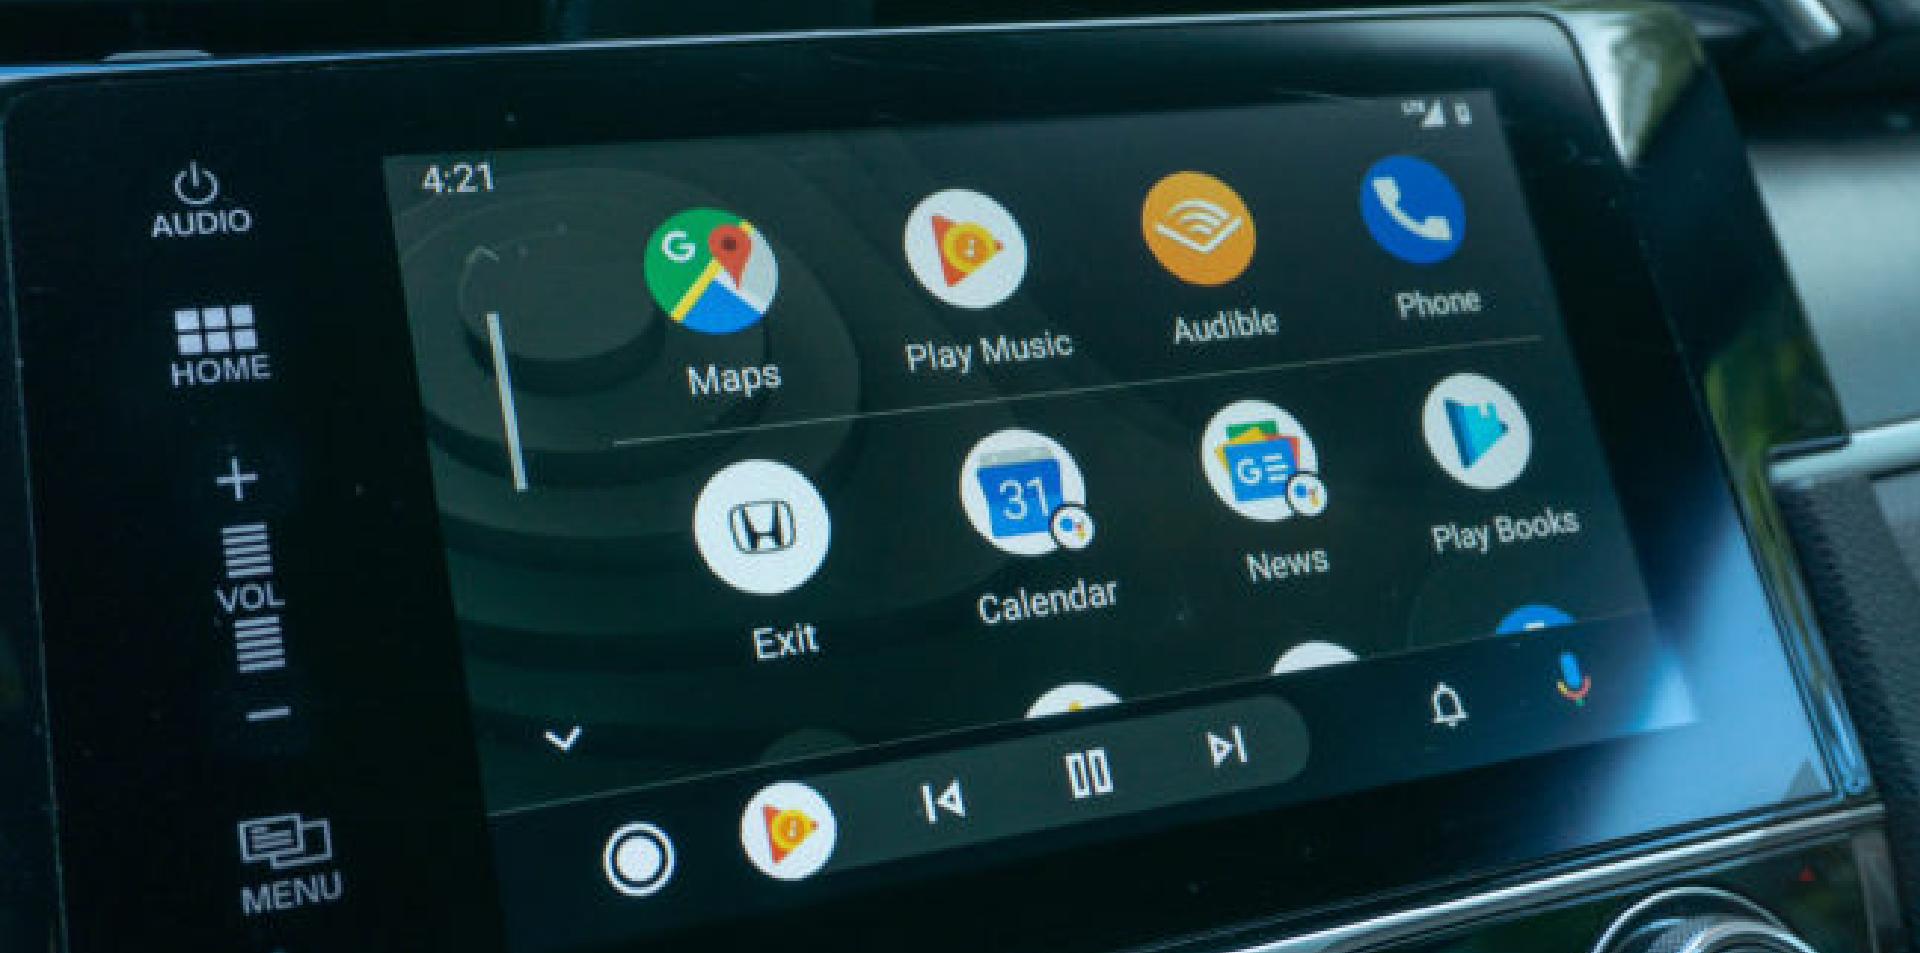 Android Auto 6.0 is coming soon - What should we expect